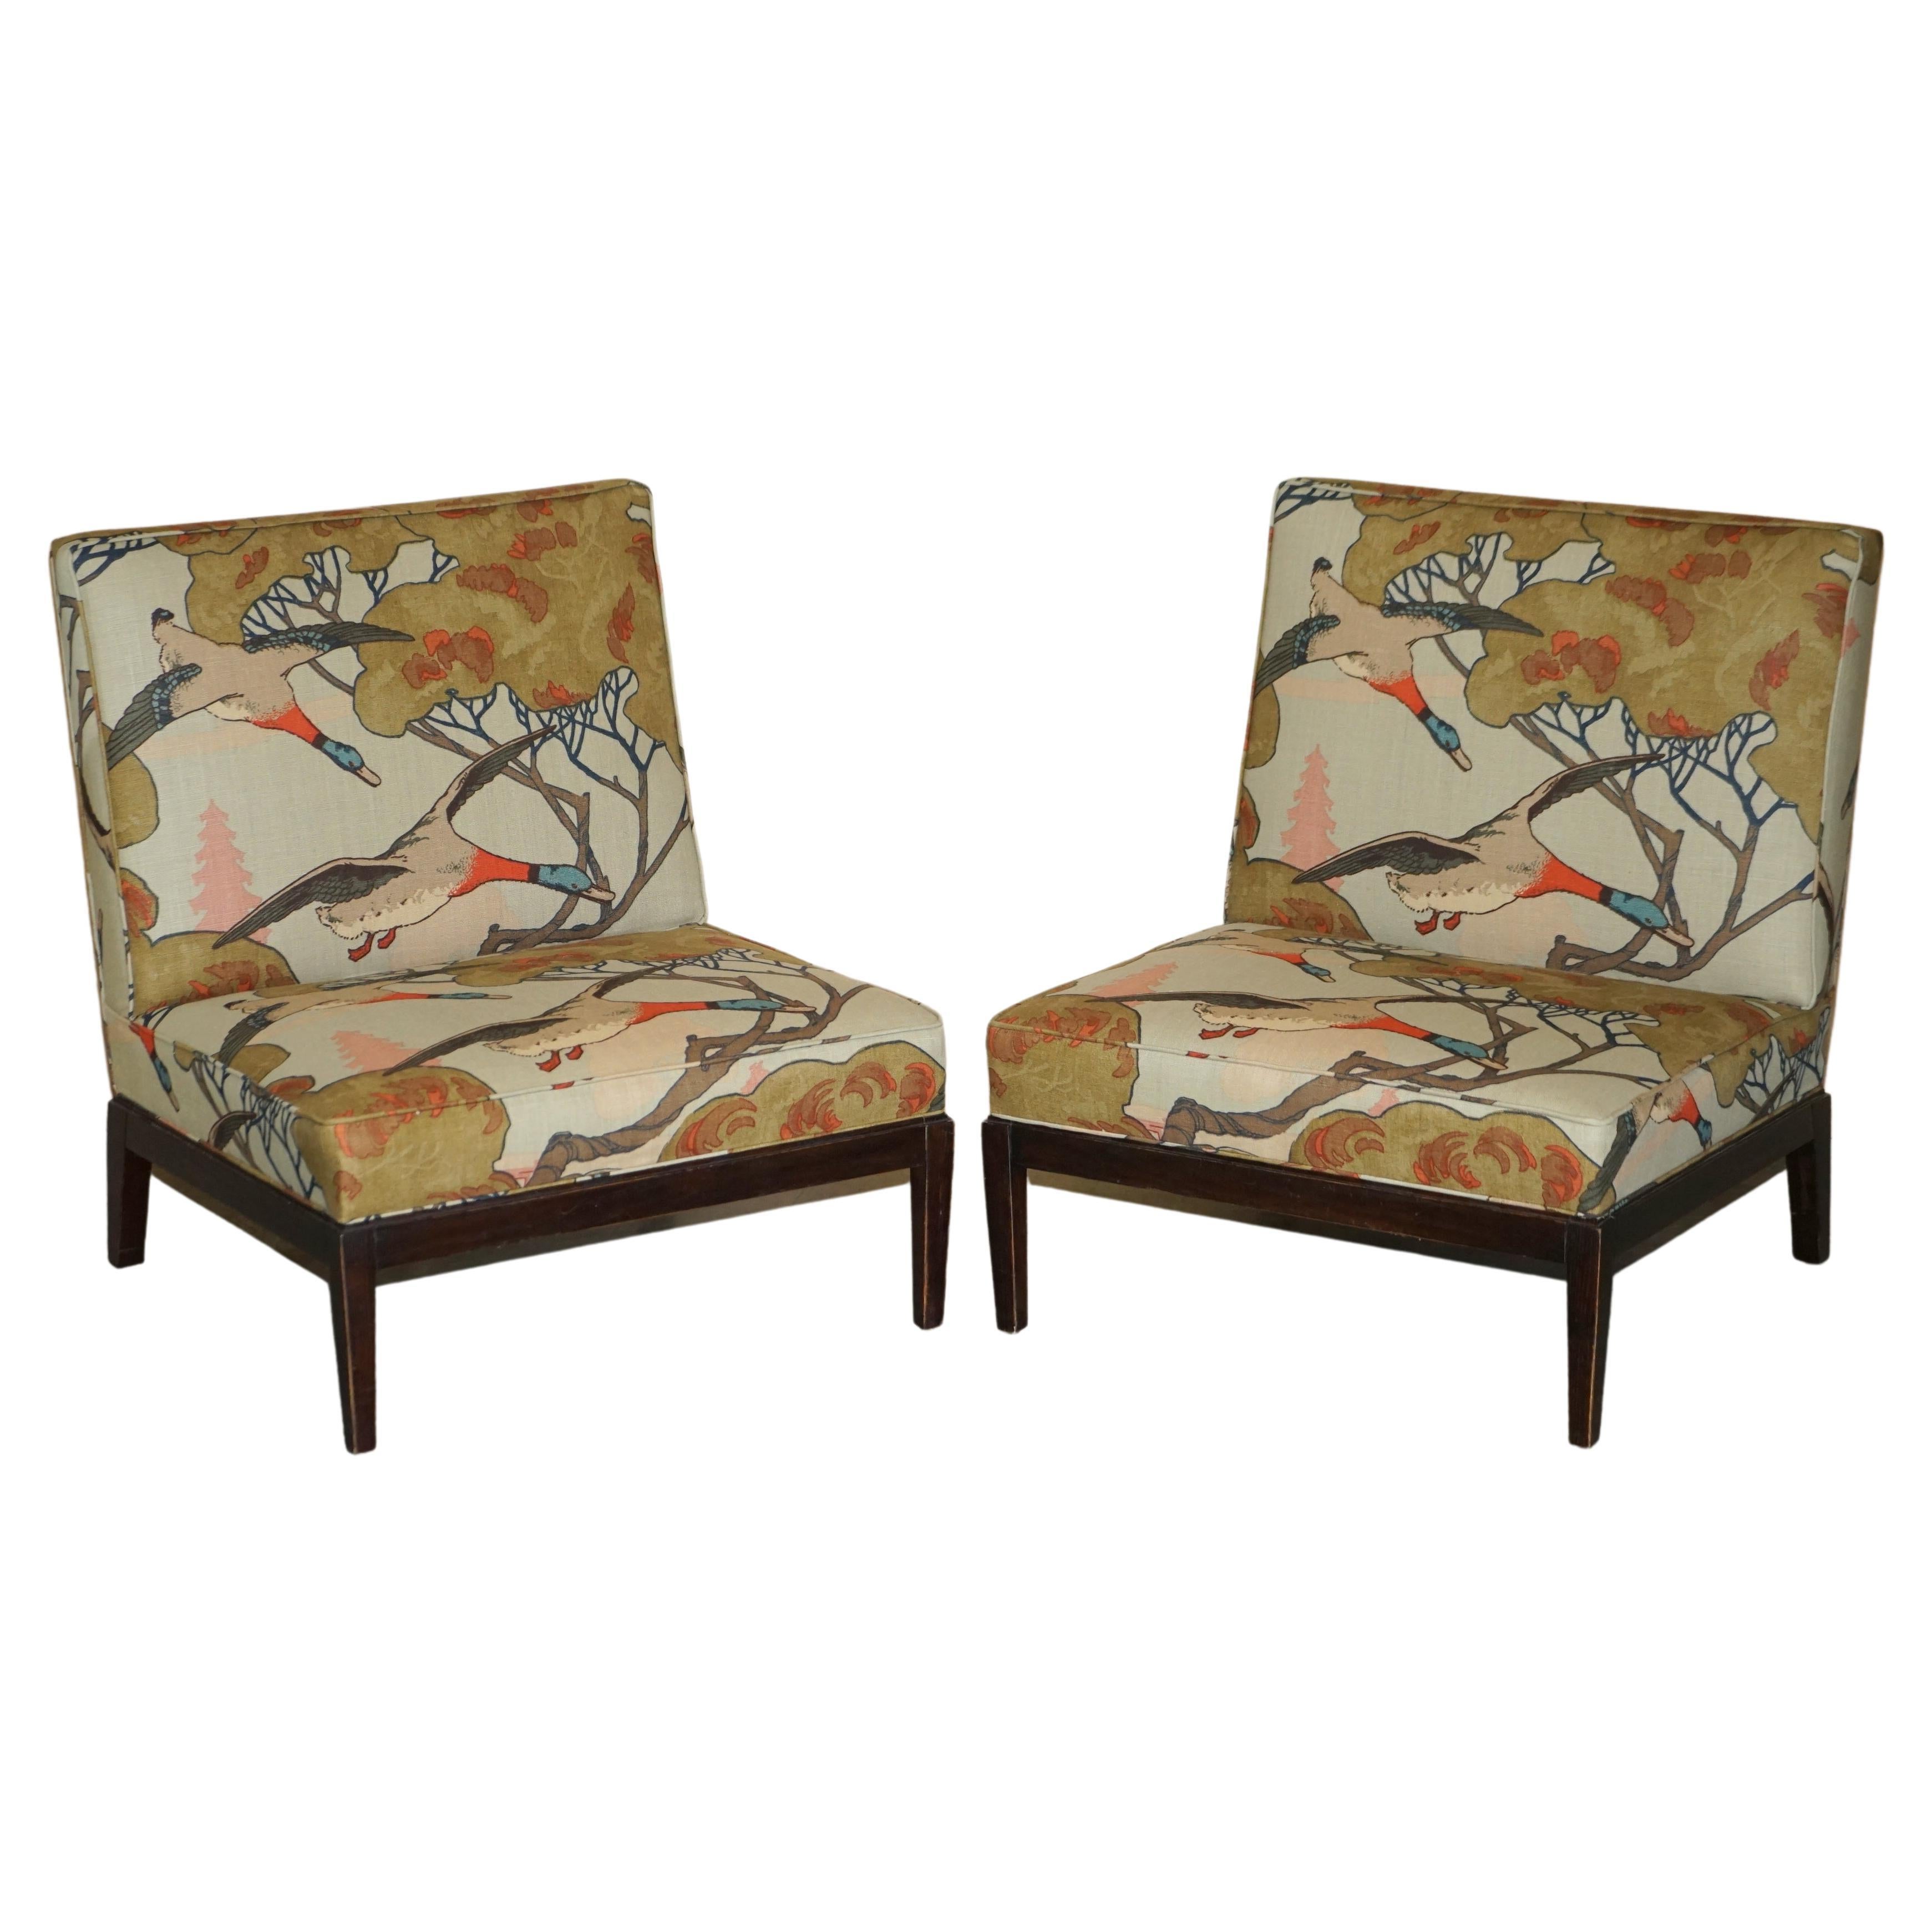 New Pair of George Smith Norris Armchairs in Mulberry Flying Ducks Upholstery For Sale